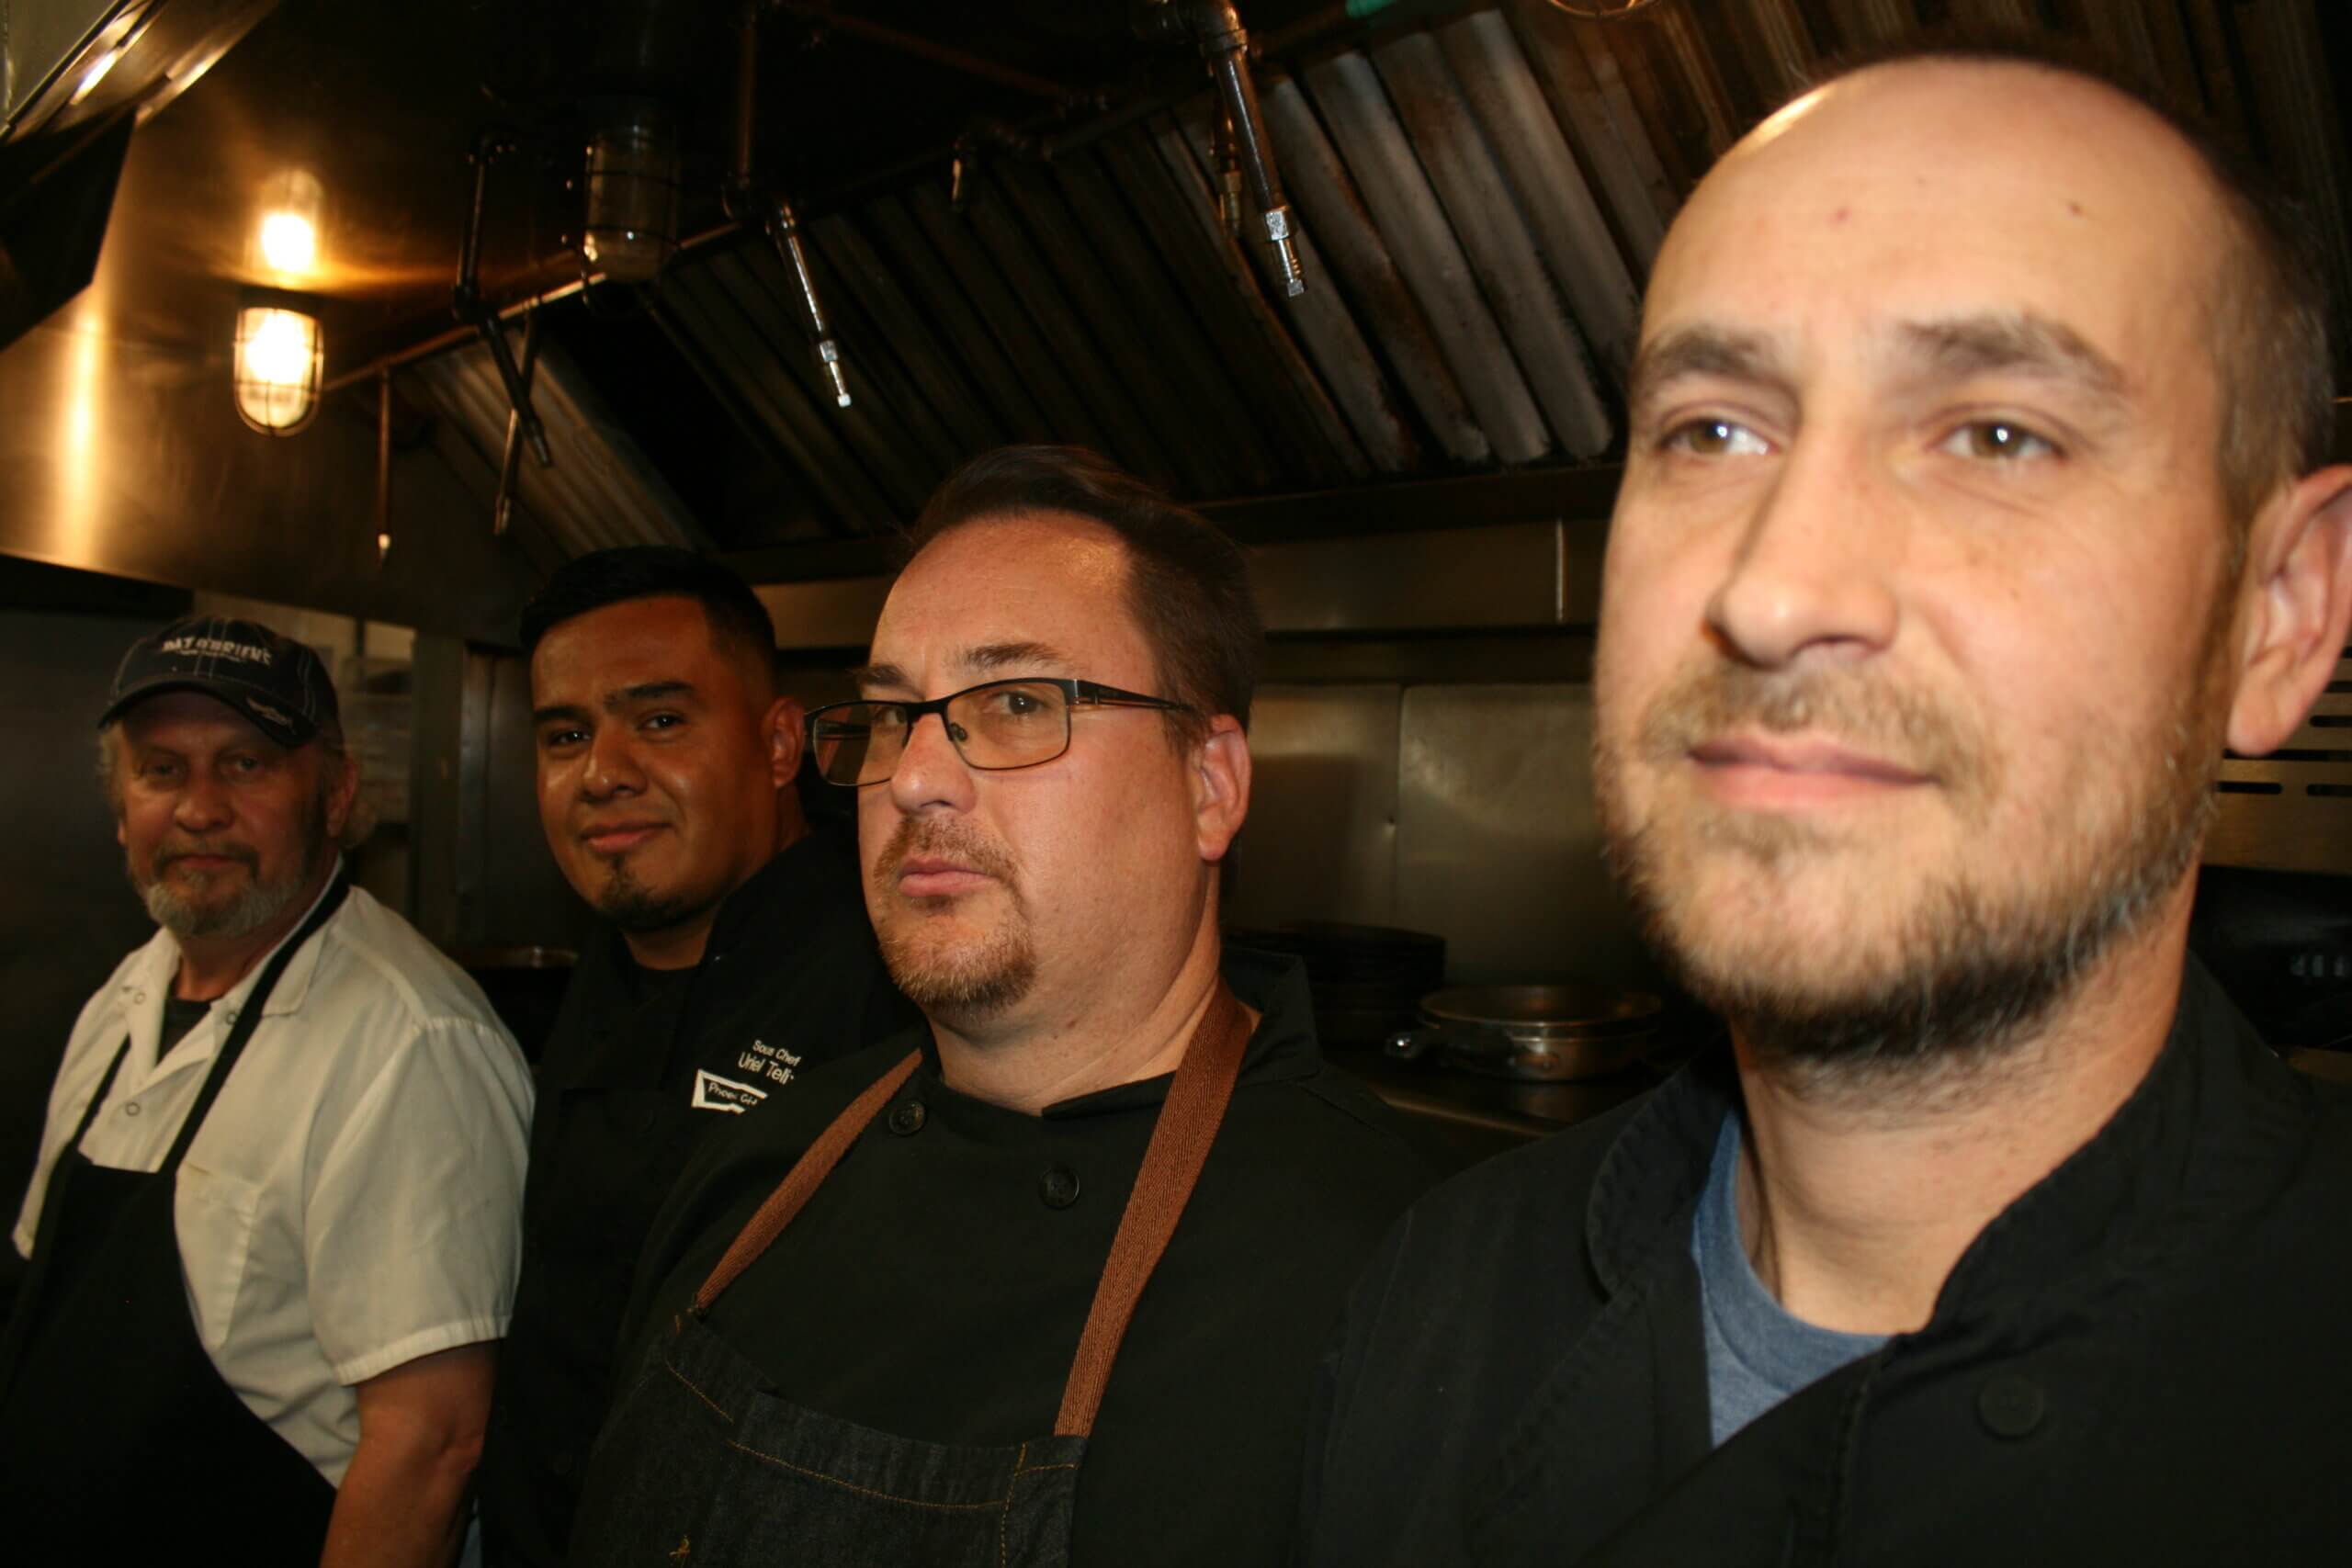 Executive Chef Micah Wyzlic and his team